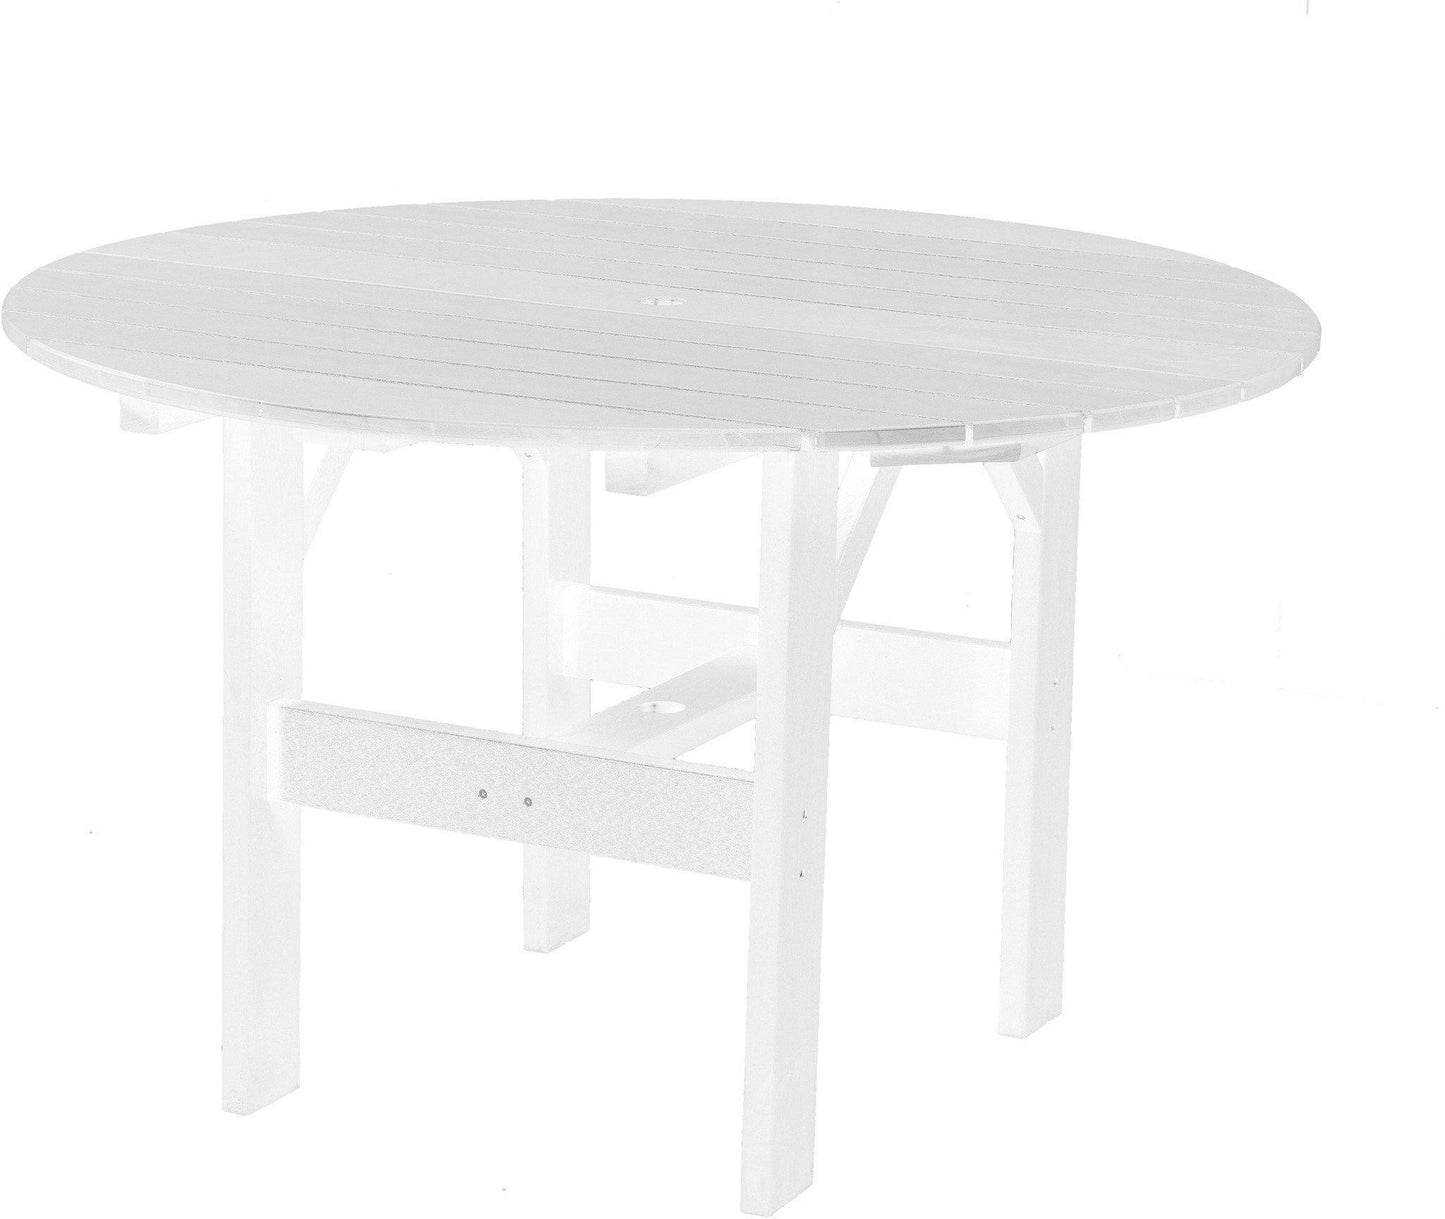 Wildridge Recycled Plastic Classic 46" Round Outdoor Dining Table - LEAD TIME TO SHIP 6 WEEKS OR LESS